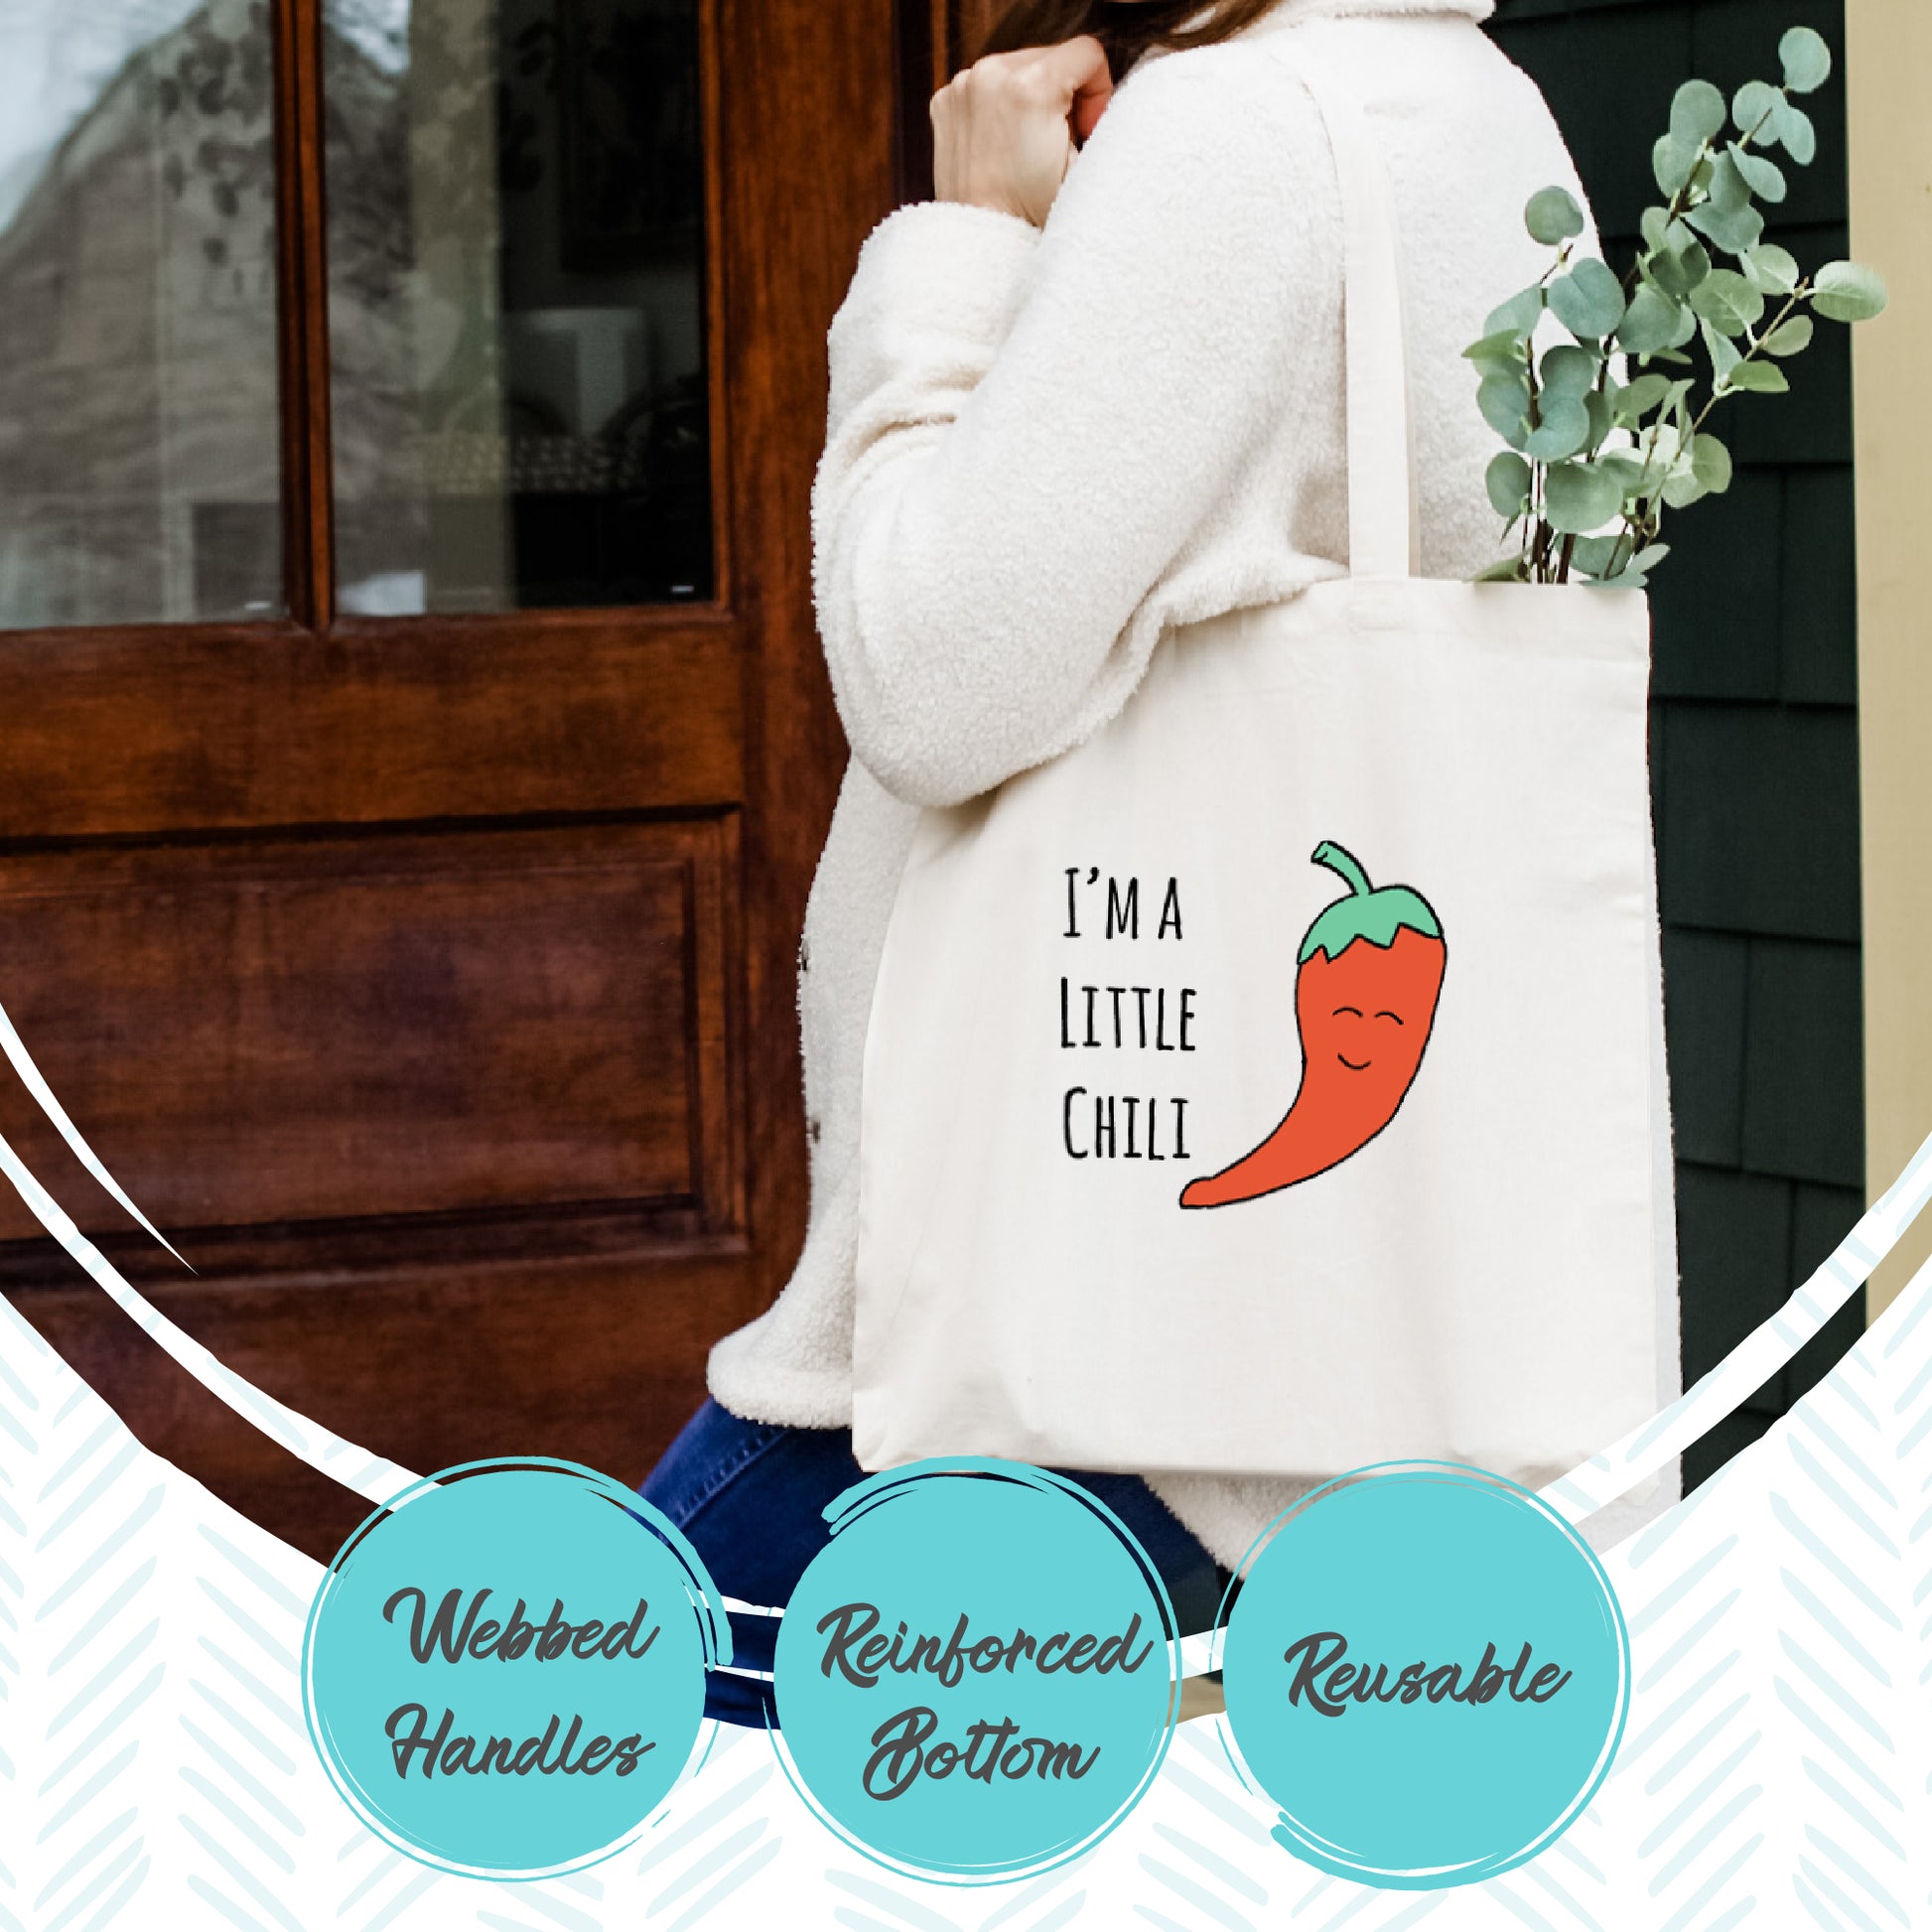 Downtown Historic Raleigh, NC - Full Color Tote - MoonlightMakers